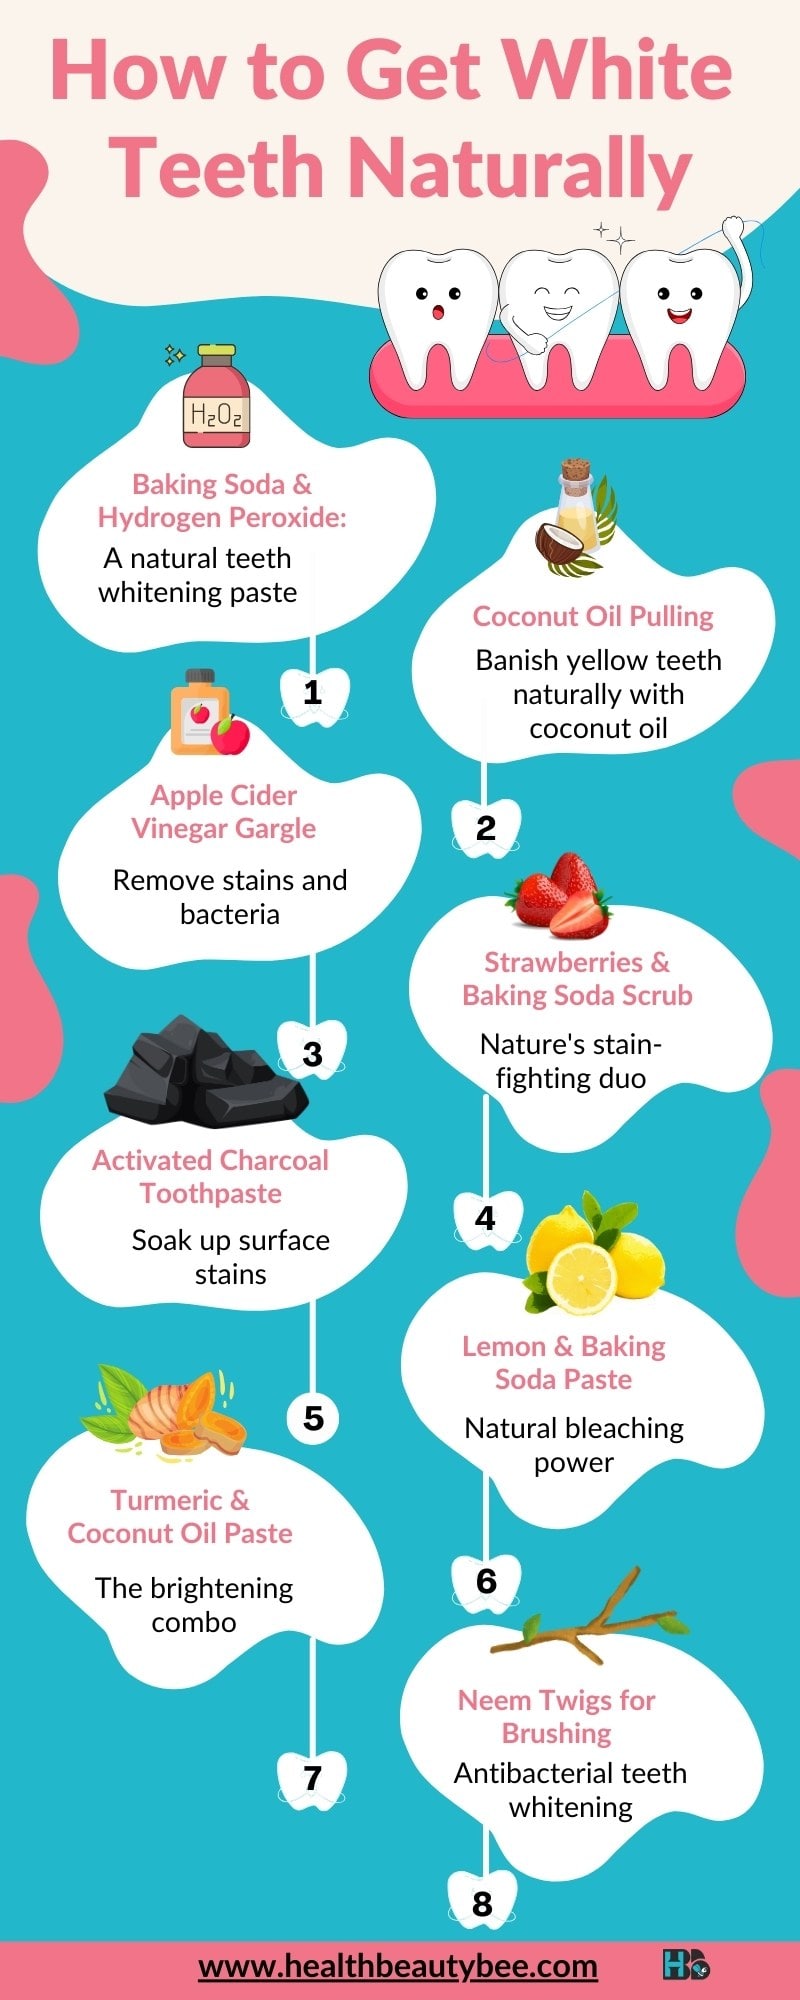 how to get white teeth healthbeautybee infographic